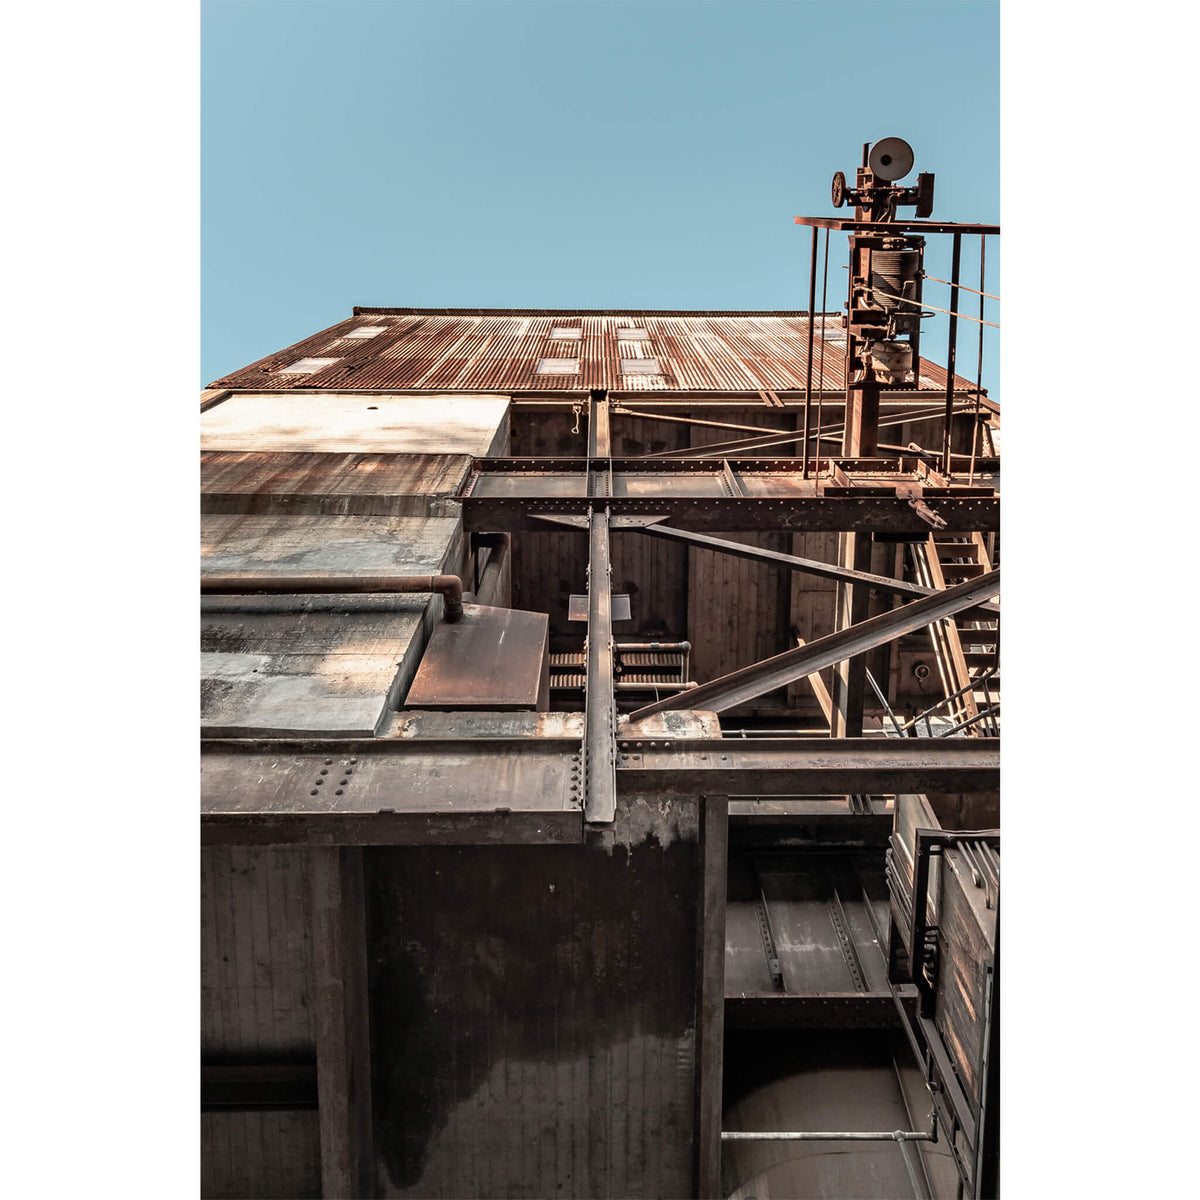 Ash Handling Tower Lookup | White Bay Power Station